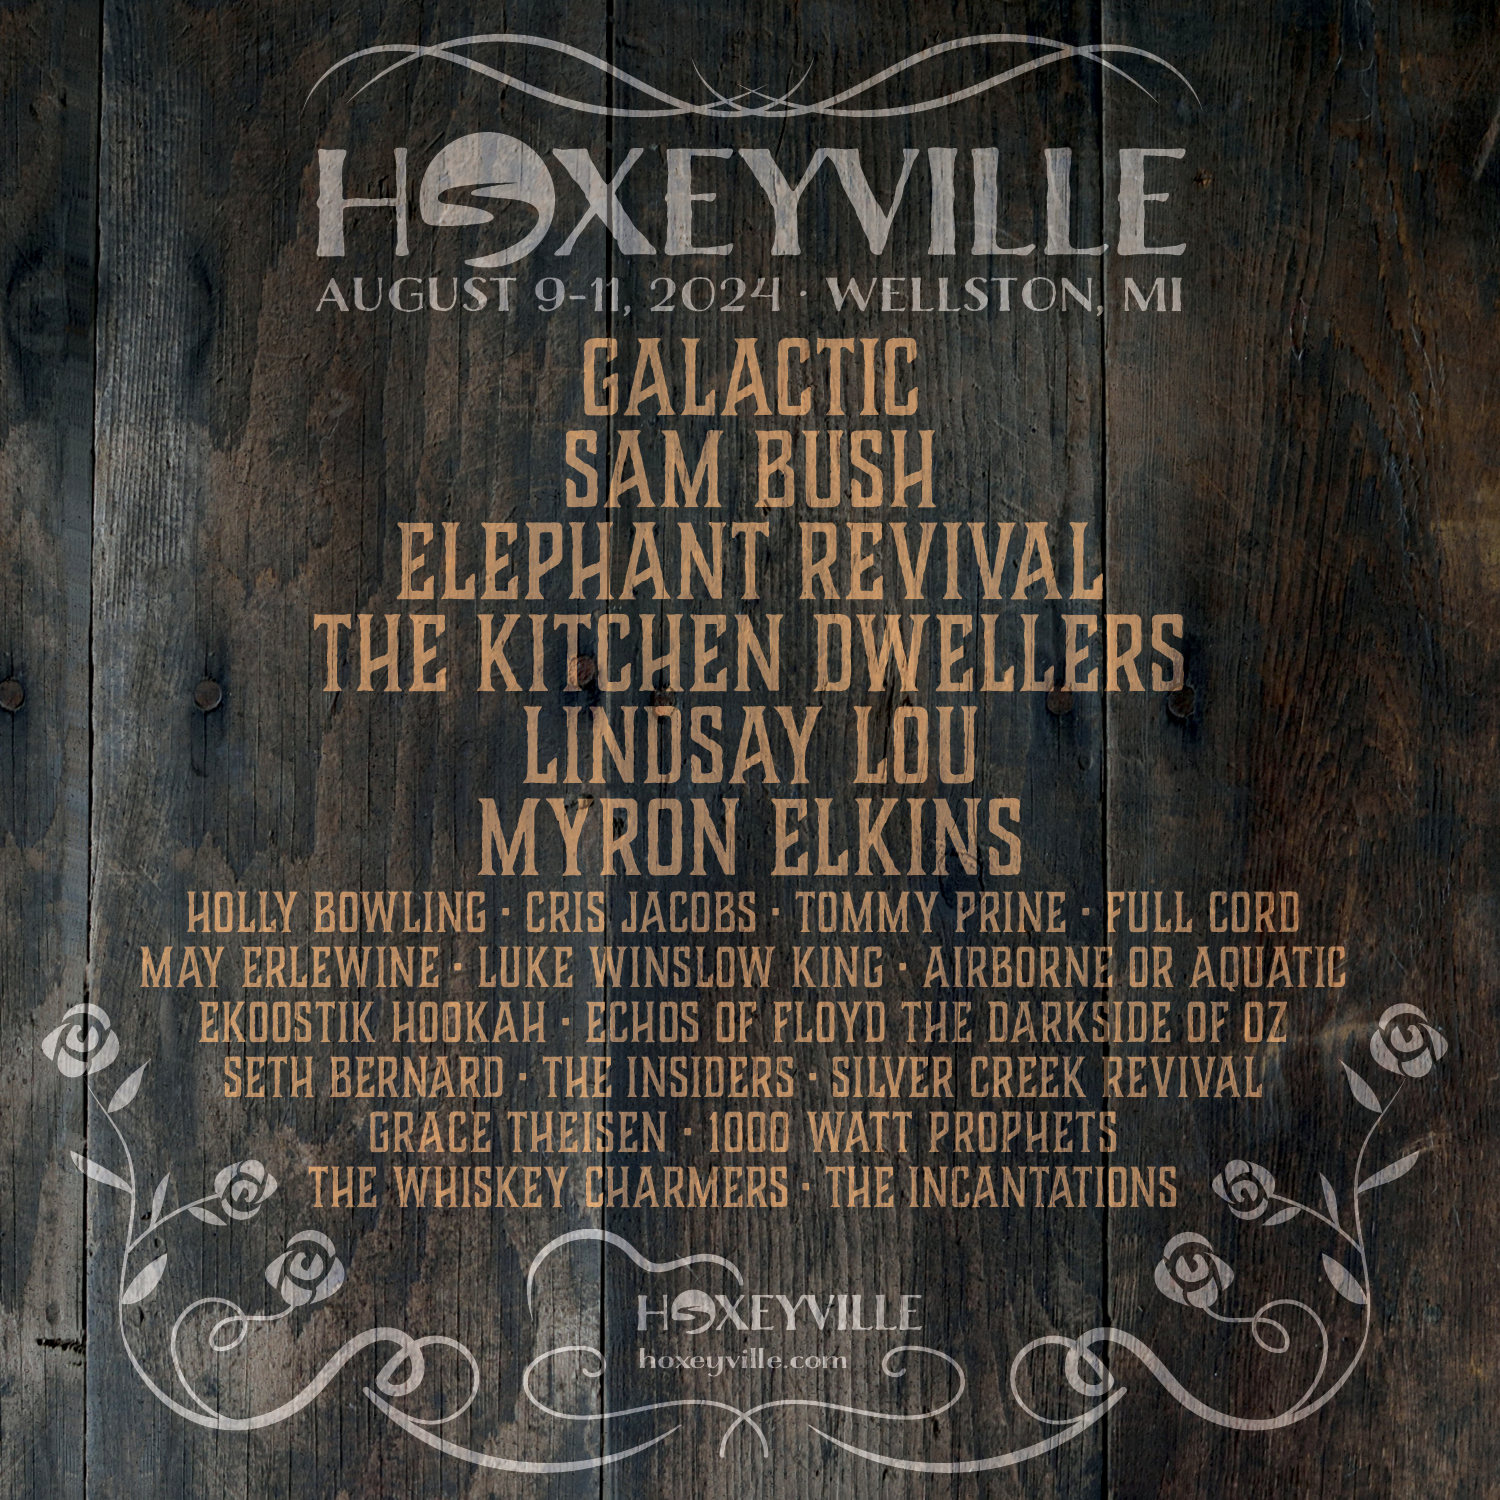 Hoxeyville Music Festival Announces Lineup for 22nd Event Held Aug. 9 - 11 in Wellston, MI